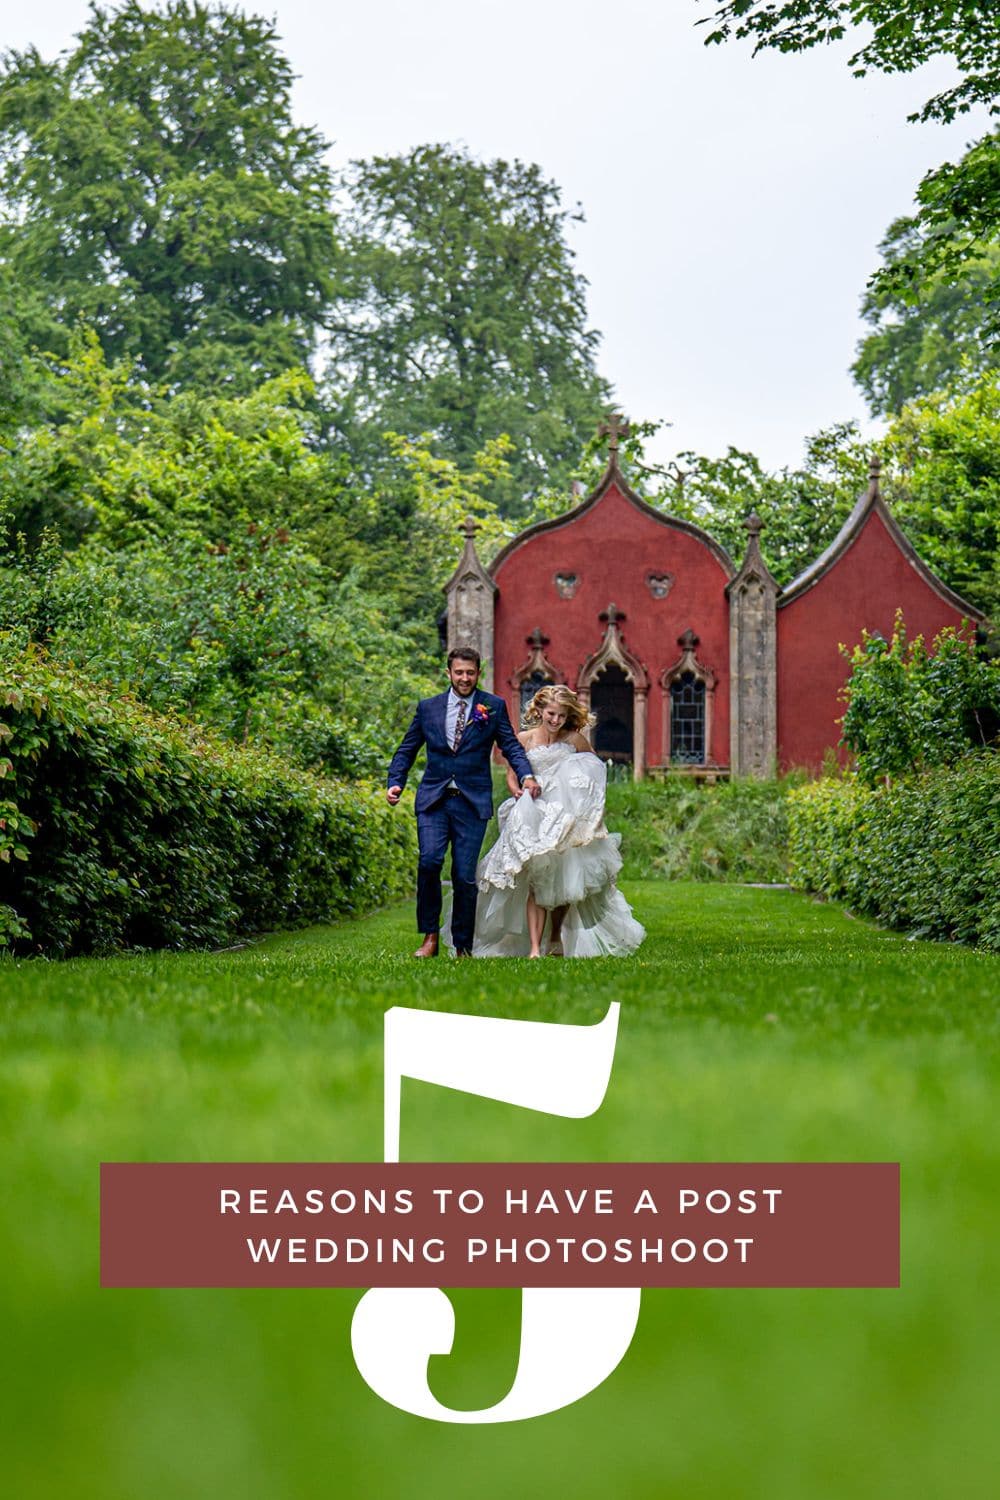 5 reasons to have a post wedding photoshoot